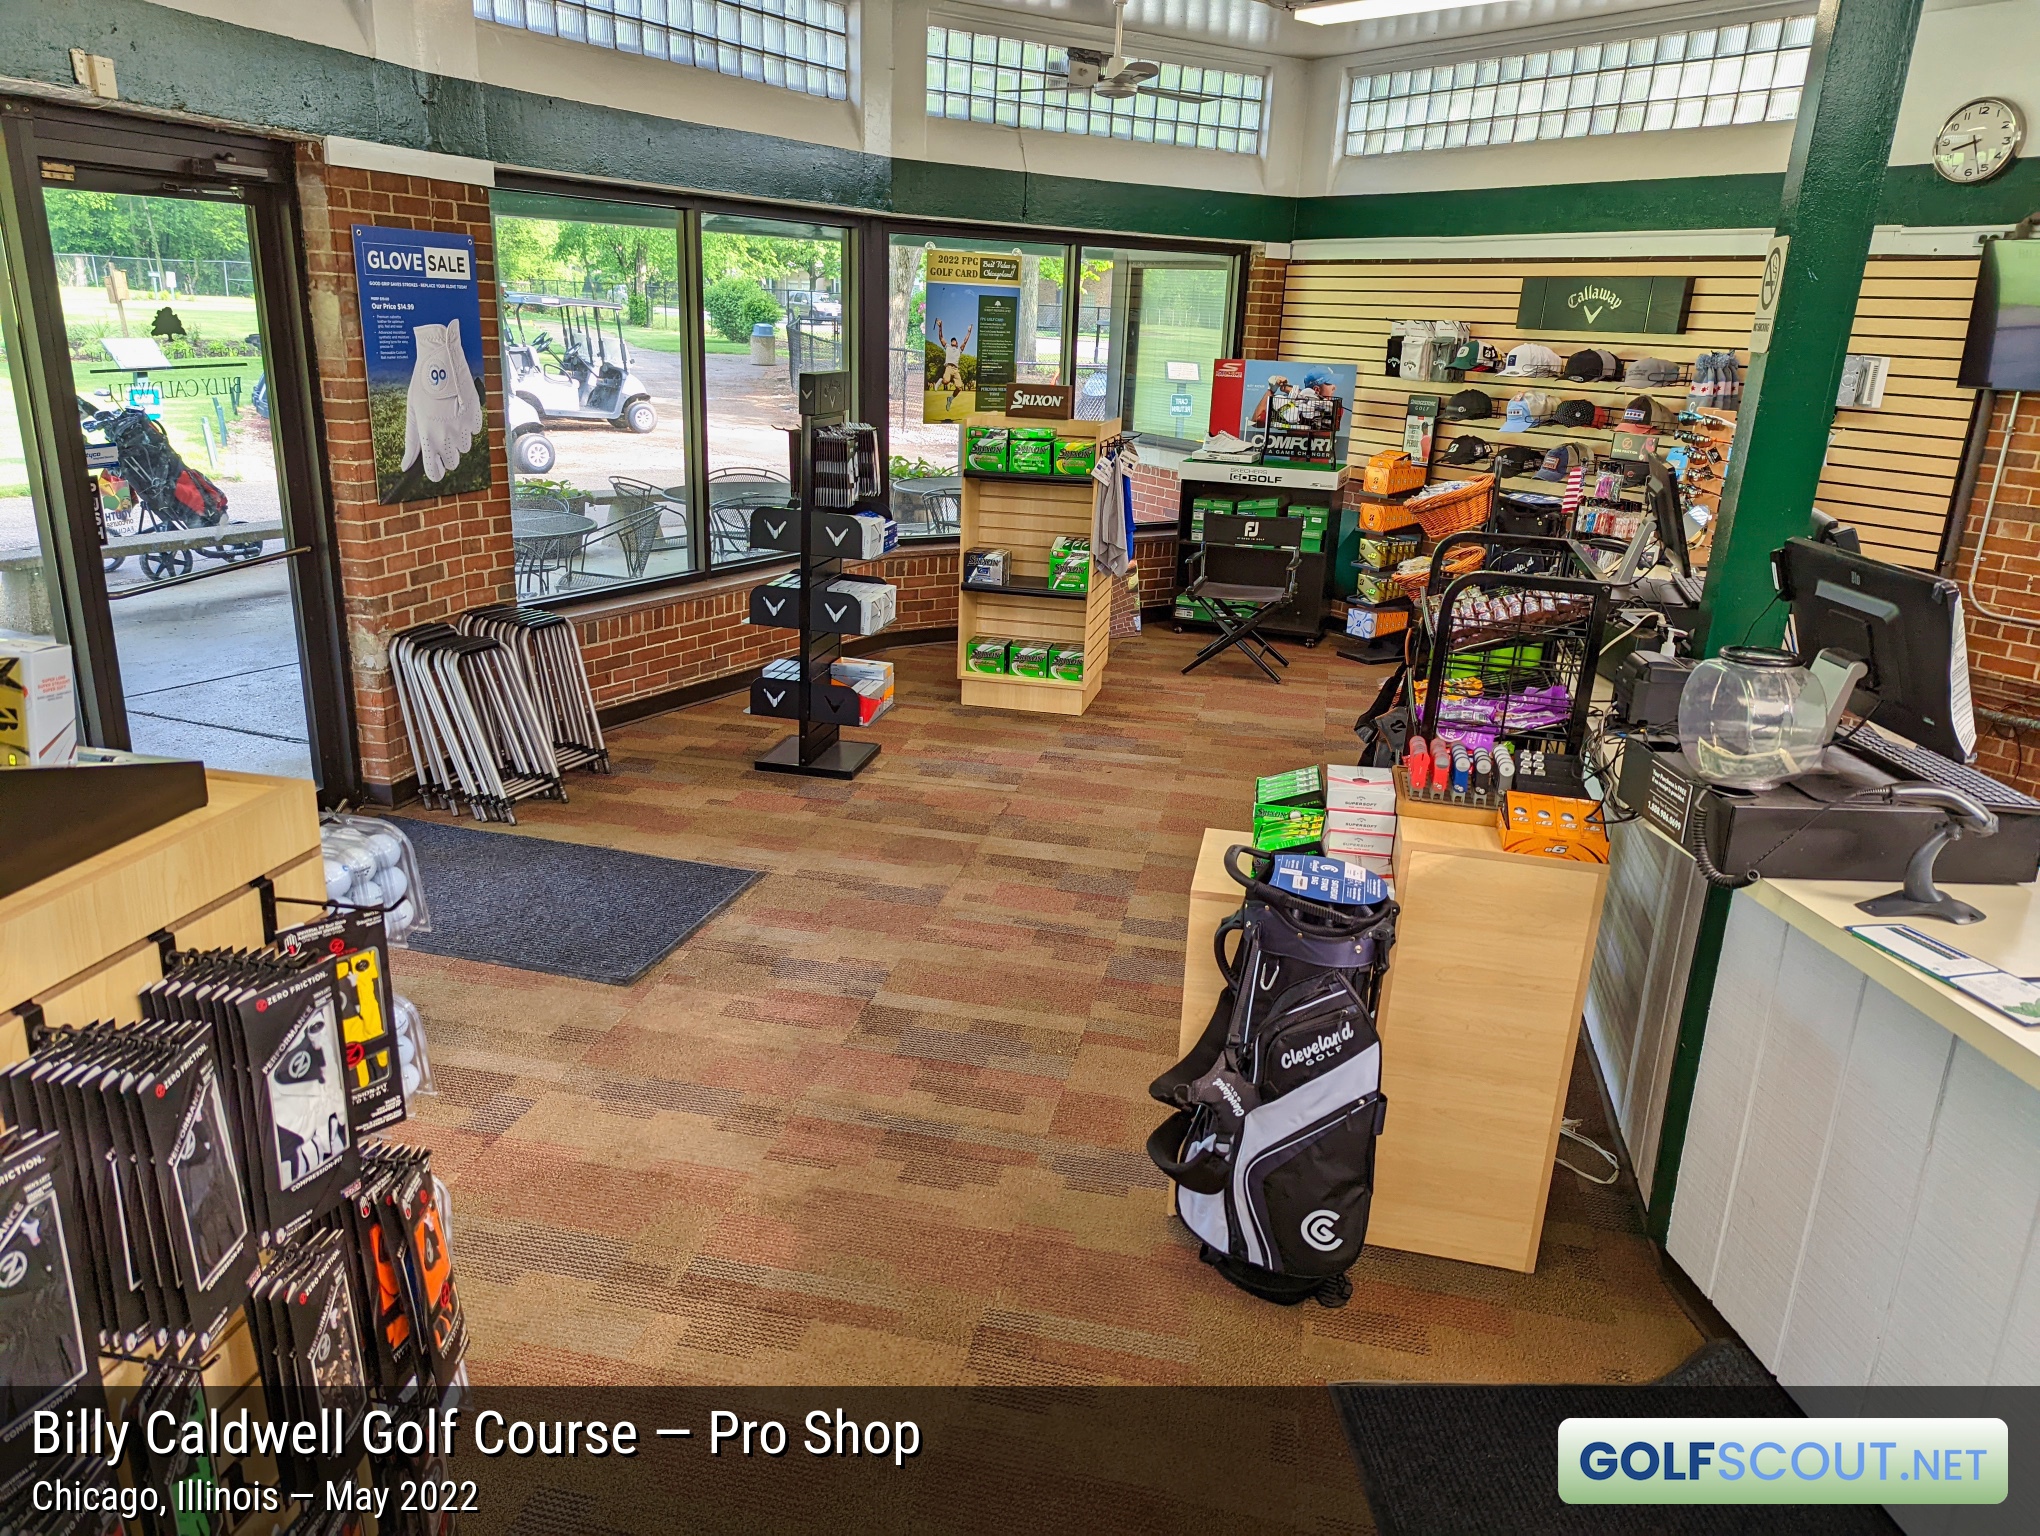 Photo of the pro shop at Billy Caldwell Golf Course in Chicago, Illinois. Billy Caldwell's pro shop has the standard stuff you need at the course. Beverages, golf paraphernalia like golf balls, gloves, etc. They have snacks too.